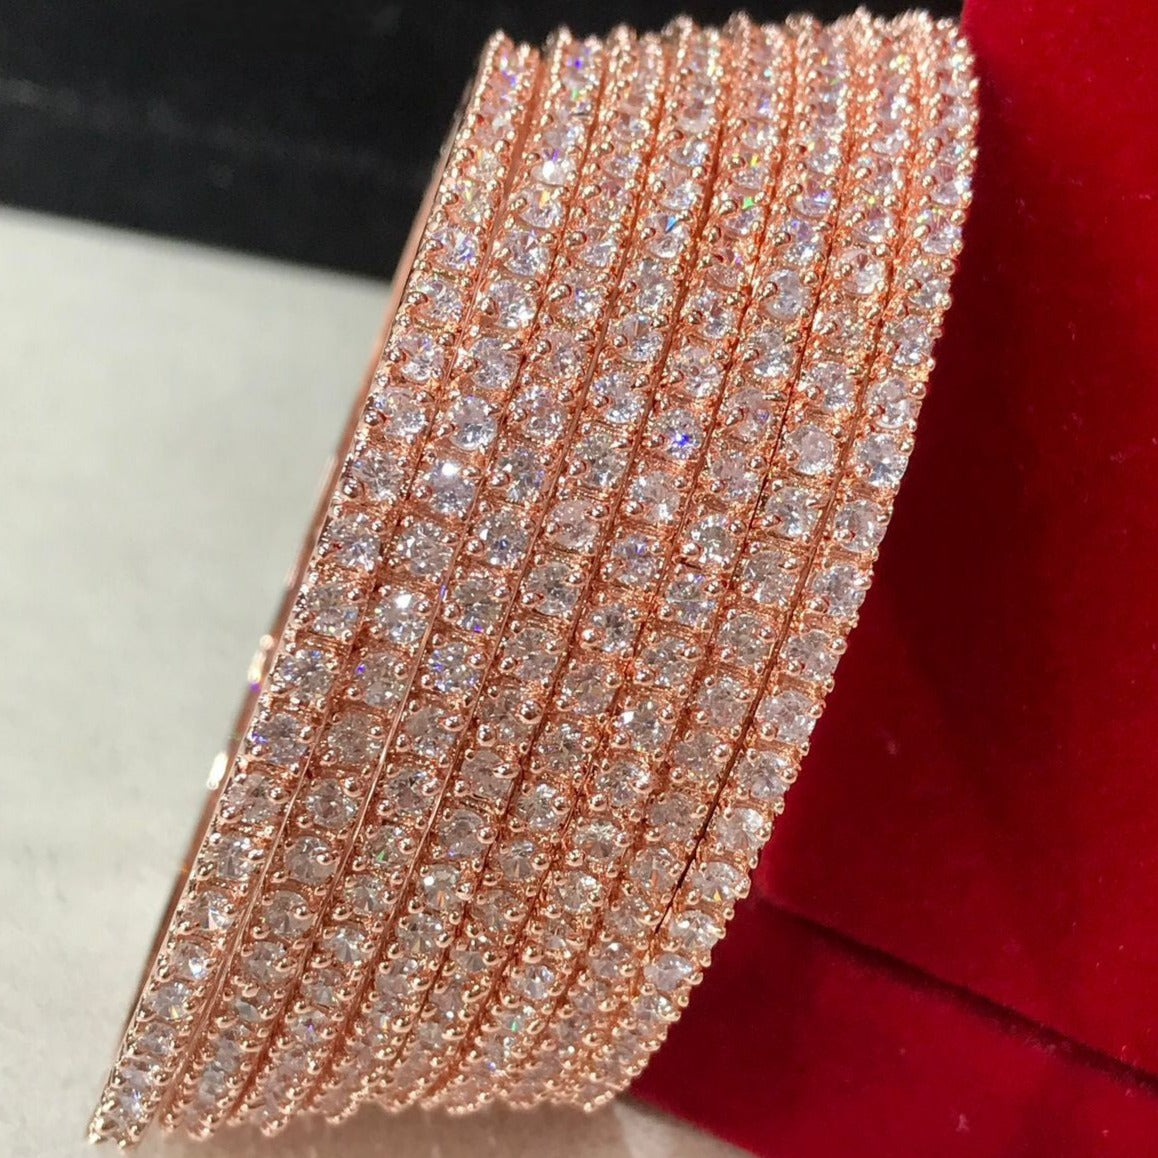 Exquisite Set of 8 American Diamond Bangles in Rose Gold Polished Perfection